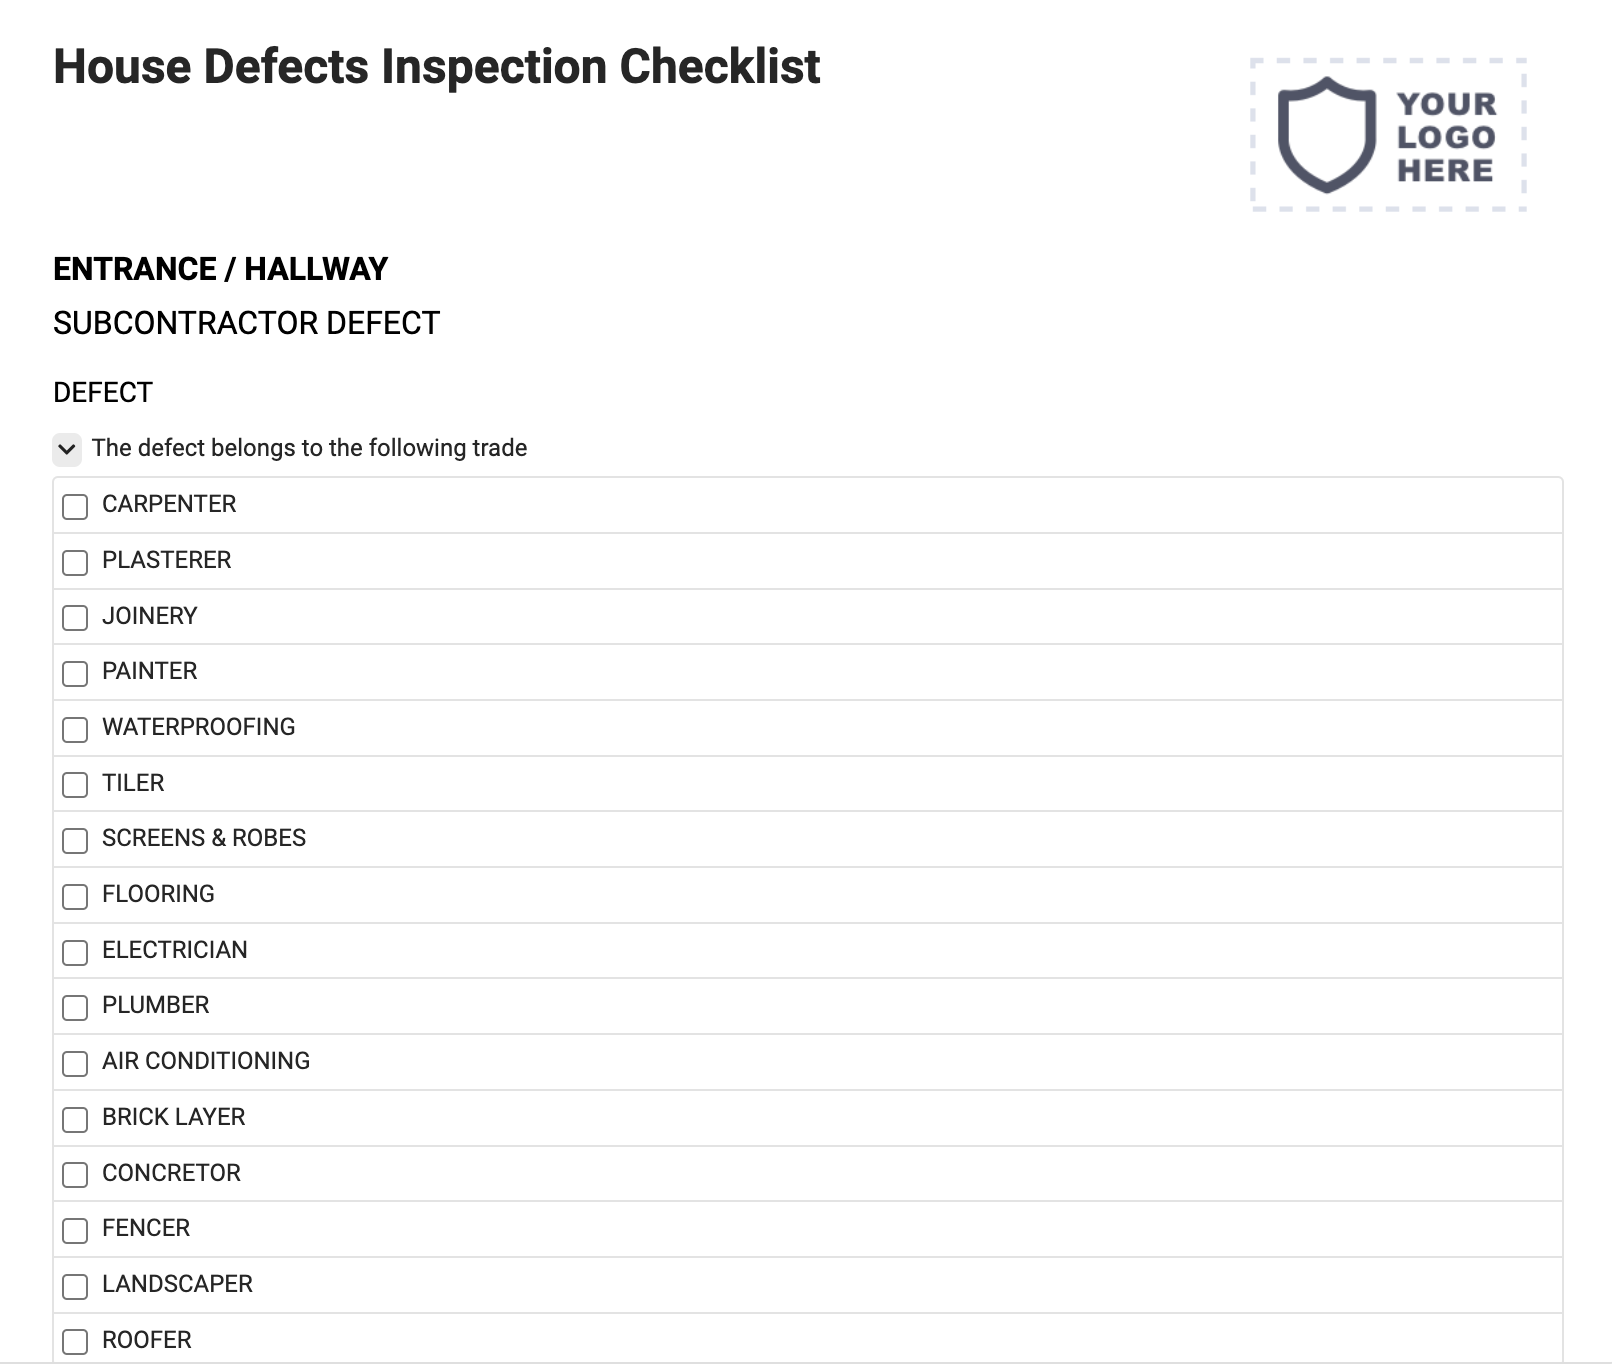 House Defects Inspection Checklist